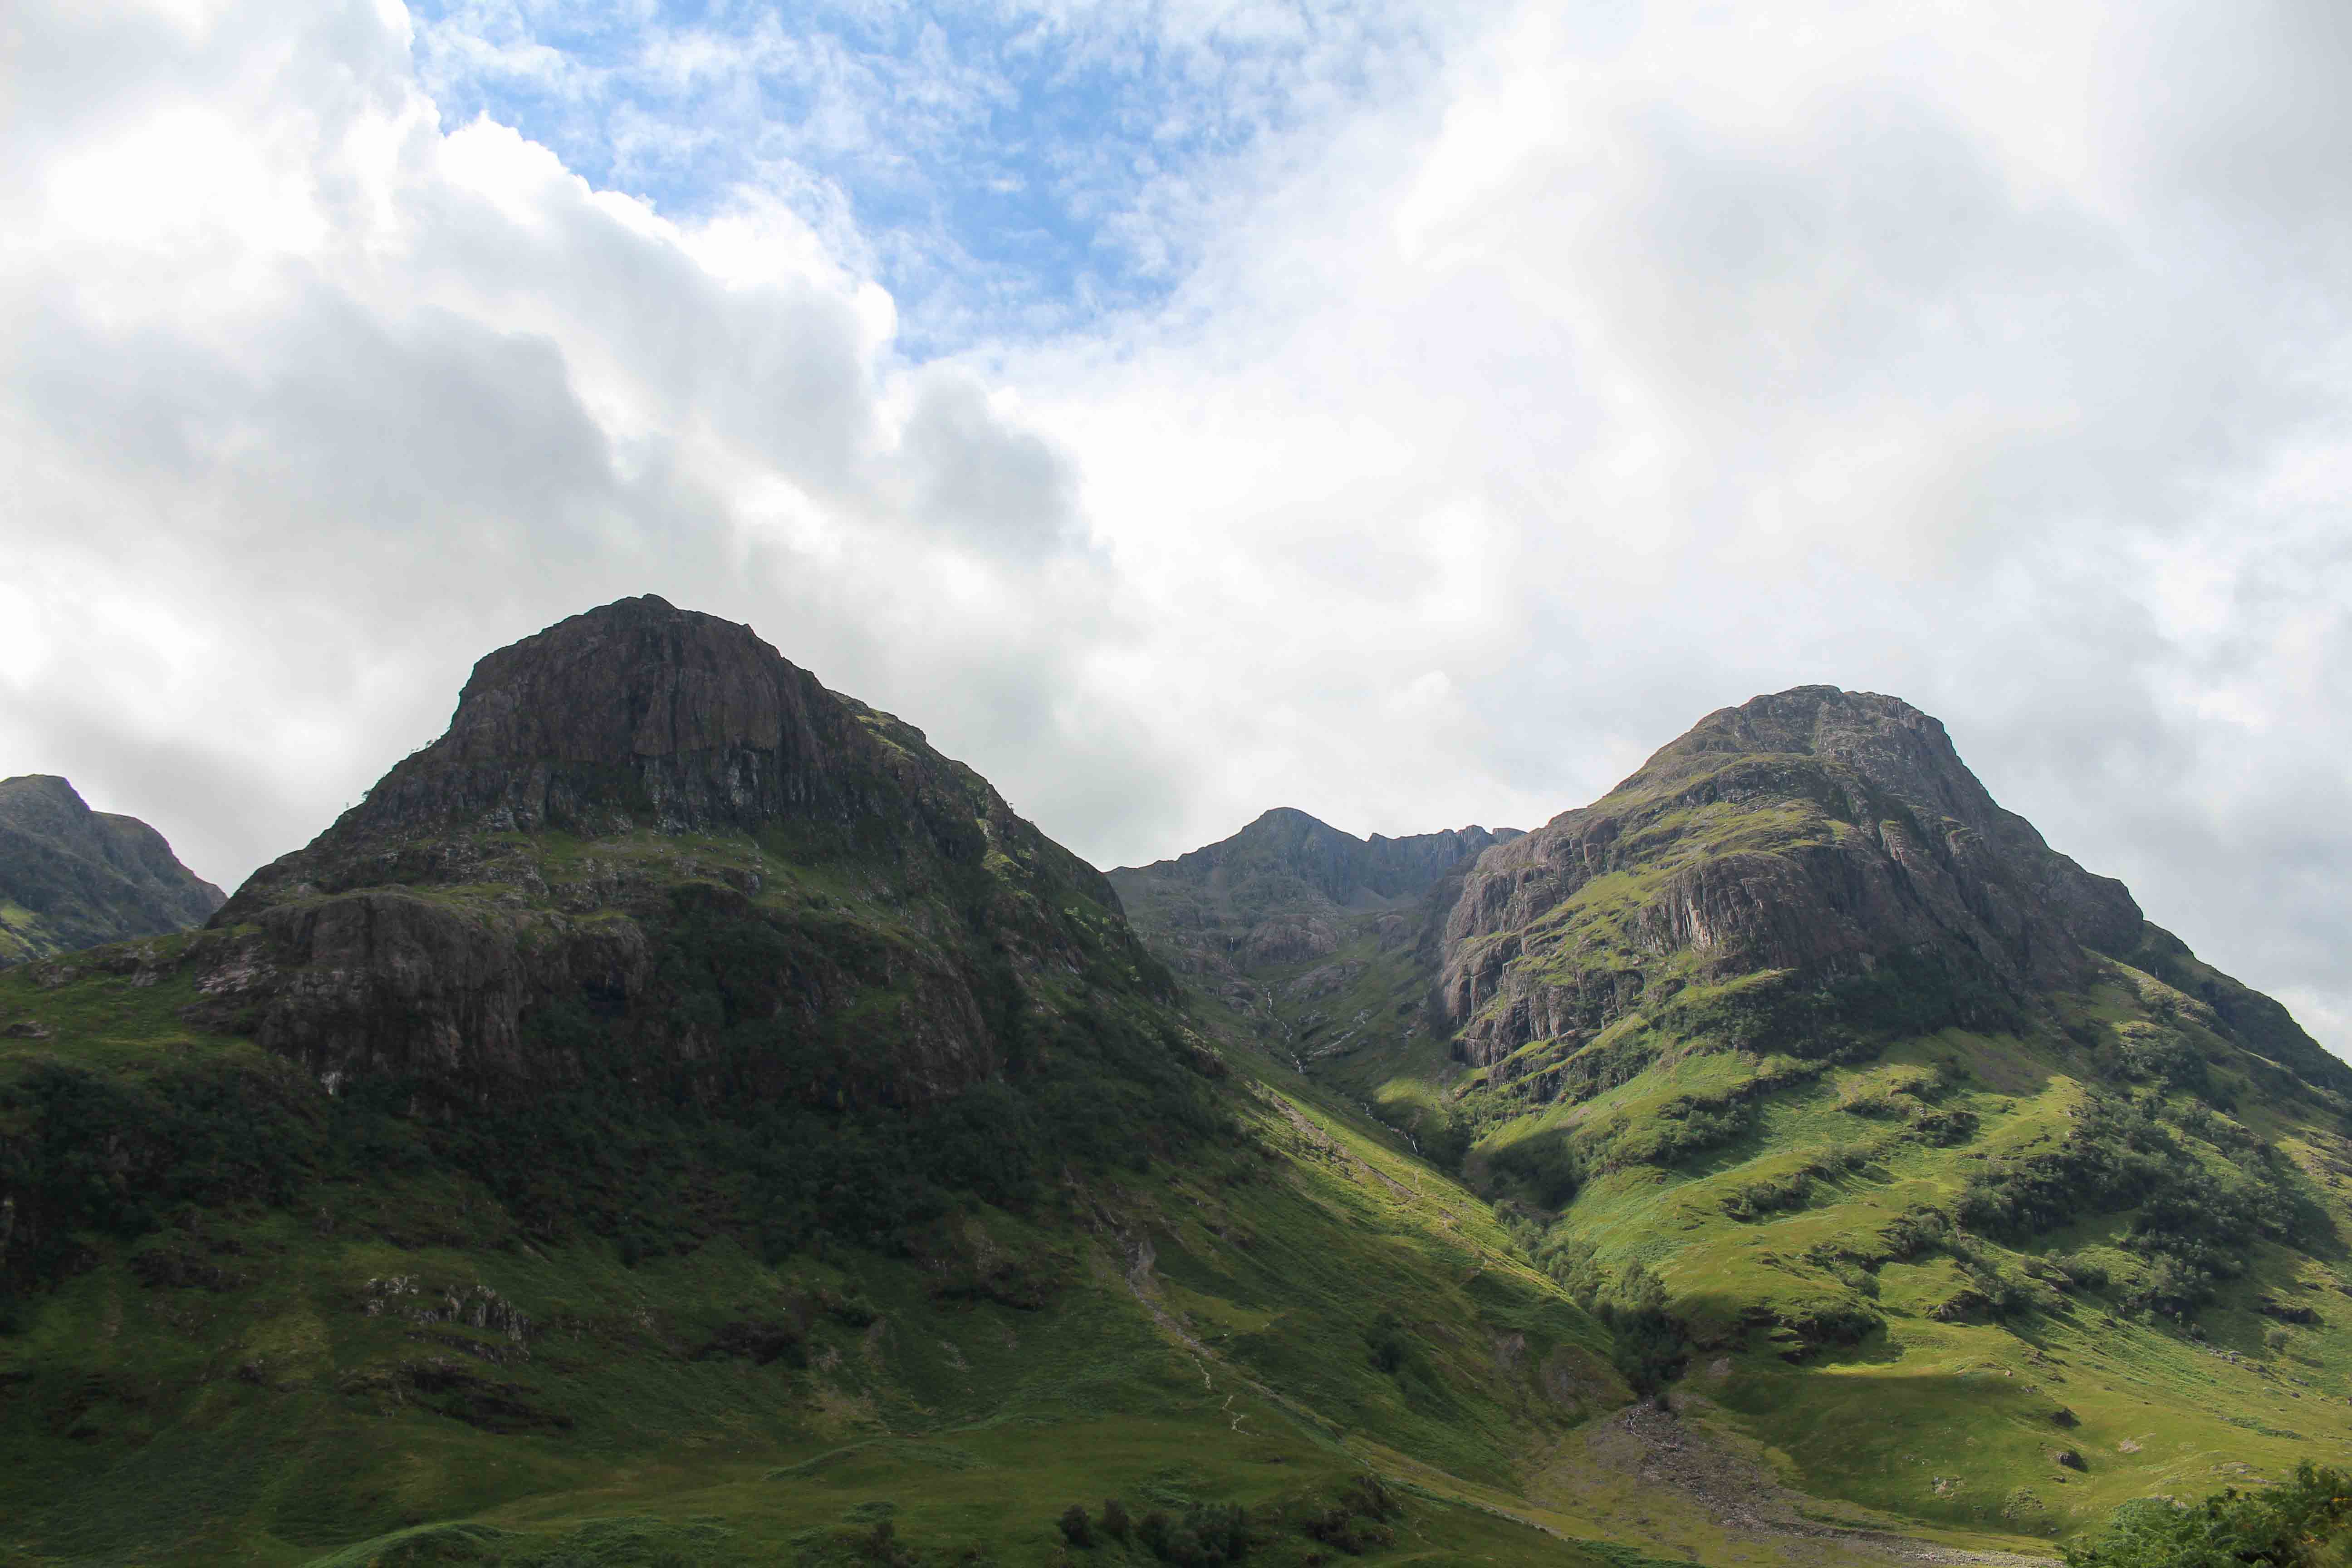 If you go to Scotland, don't skip the Highlands! There's so much to see and experience! We took a day trip with The Hairy Coo touring company and it was the best way to see a lot in a day!